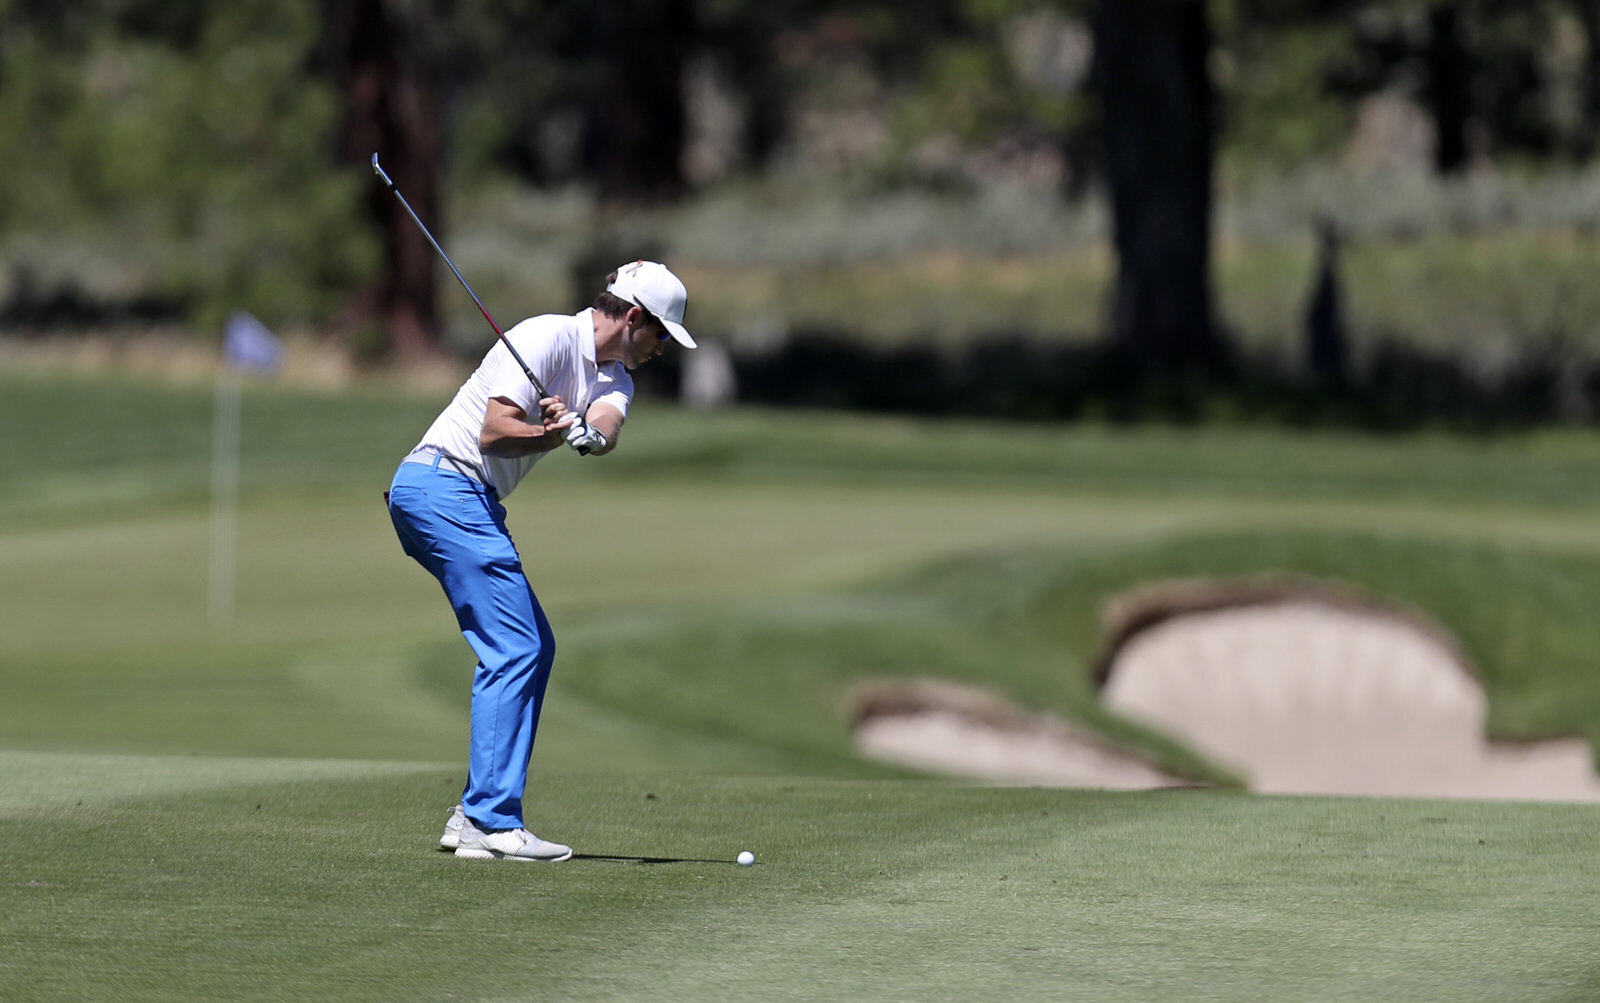  TRUCKEE, CALIFORNIA - AUGUST 01: Chris Baker plays his second shot on the first hole during the third round of the Barracuda Championship at Tahoe Mountain Club's Old Greenwood Golf Course on August 01, 2020 in Truckee, California. (Photo by Jed Jac